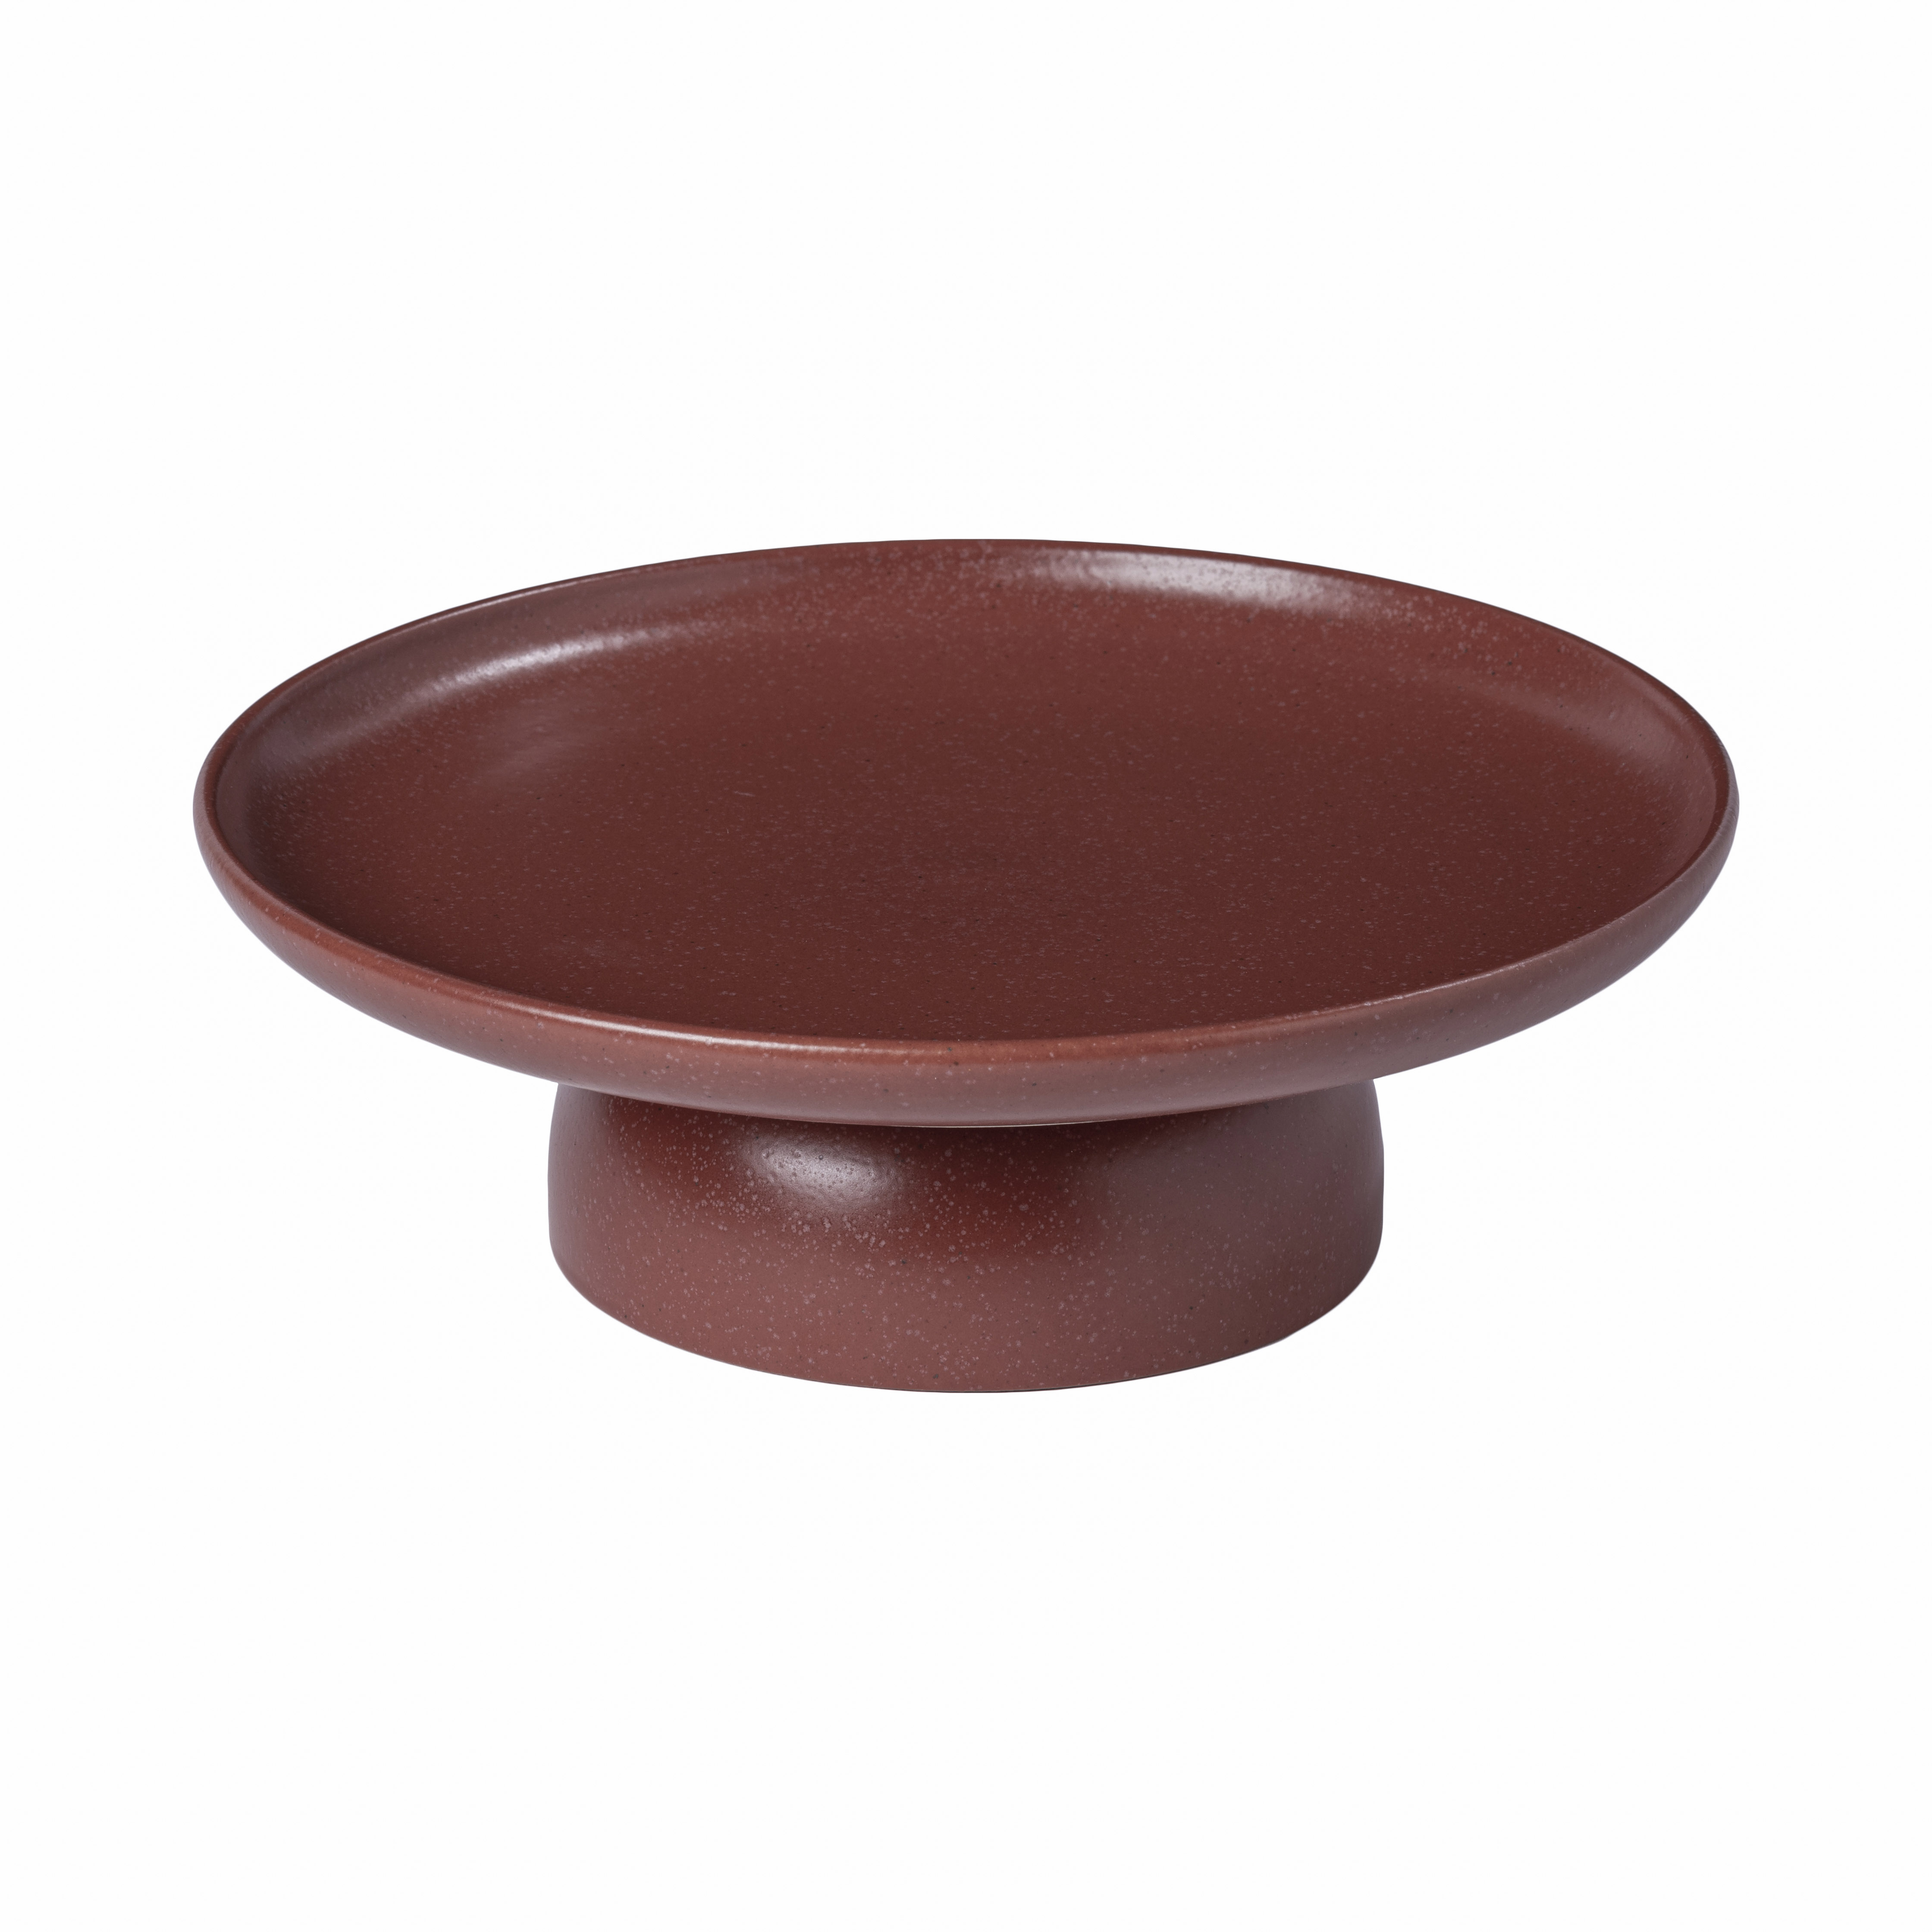 Pacifica Cayenne Footed Plate 26.8cm Gift